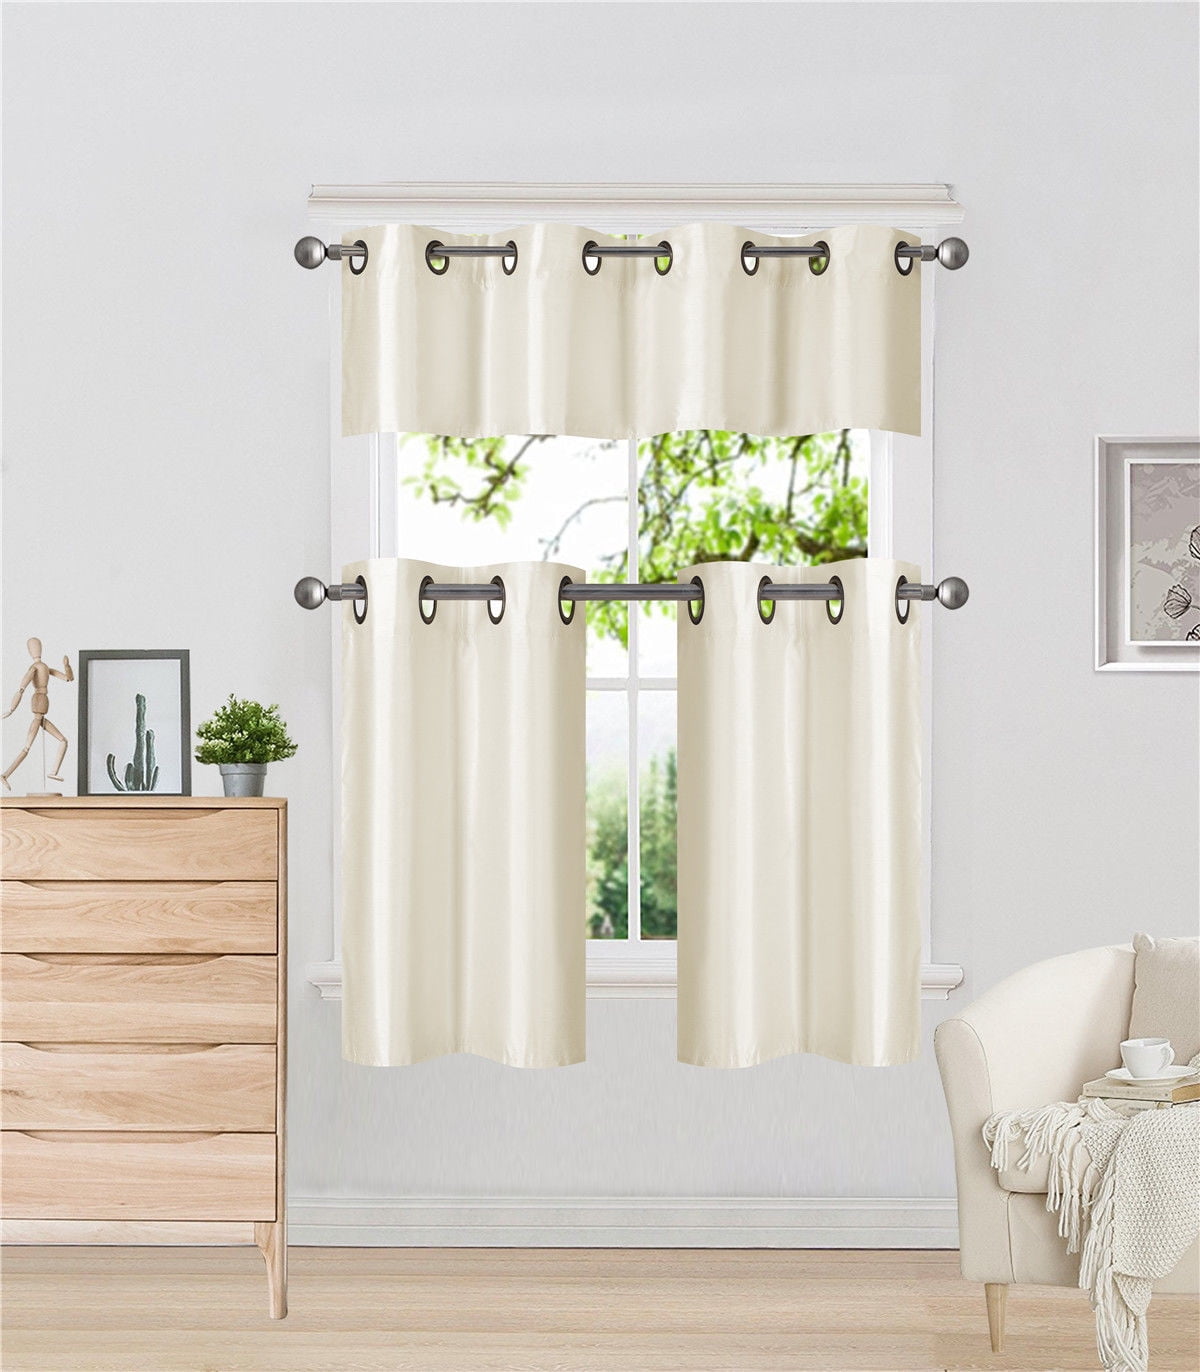 3PC SILVER FAUX LINED KITCHEN WINDOW CURTAIN 2 TIERS K3 1 SWAG VALANCE SET 